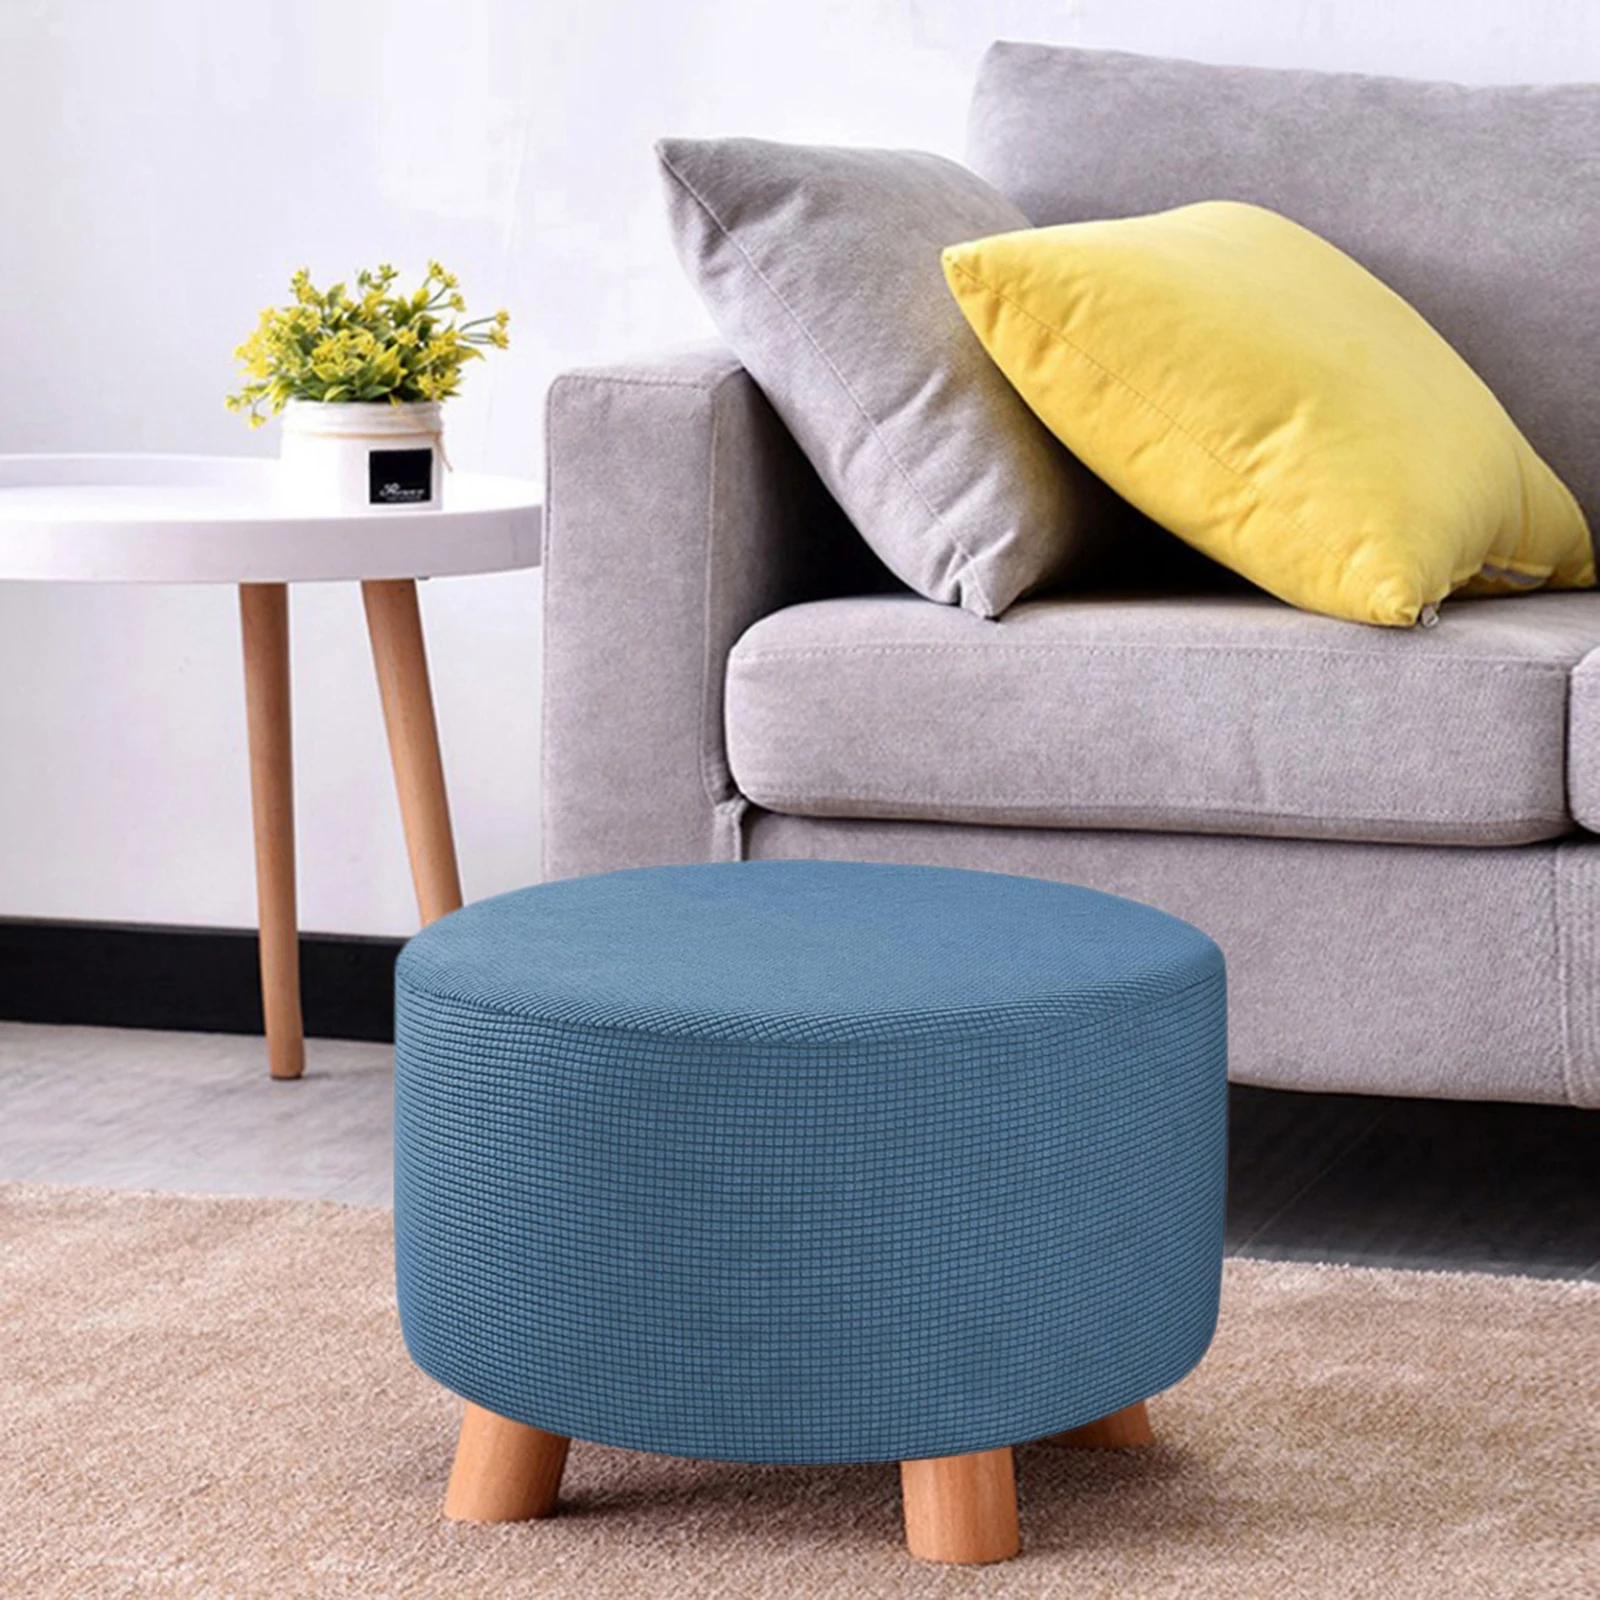 Small Ottoman Stool Seat Cover Beige Pouffe Covers 48-55cm Removable & Washable Stretch Slipcover Furniture Protector for Round Foot Stool Dia MERIGLARE Round Footstool Cover 